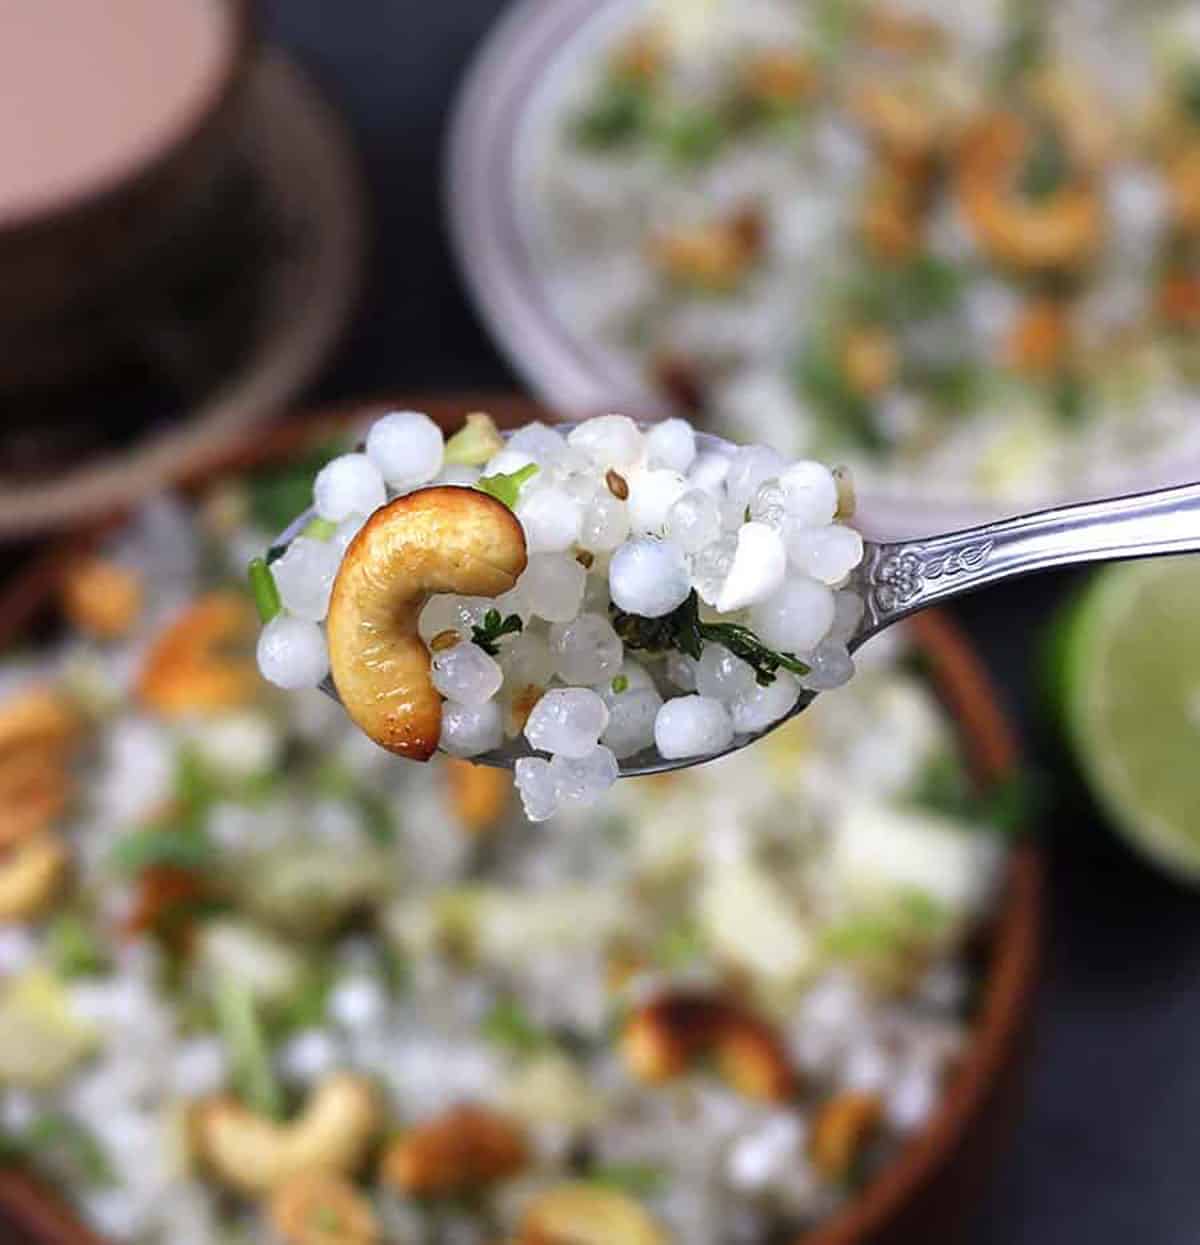 Top view of sabudana khichdi in a spoon, with bowl full of sabudana khichdi, which is out of focus,in the background.